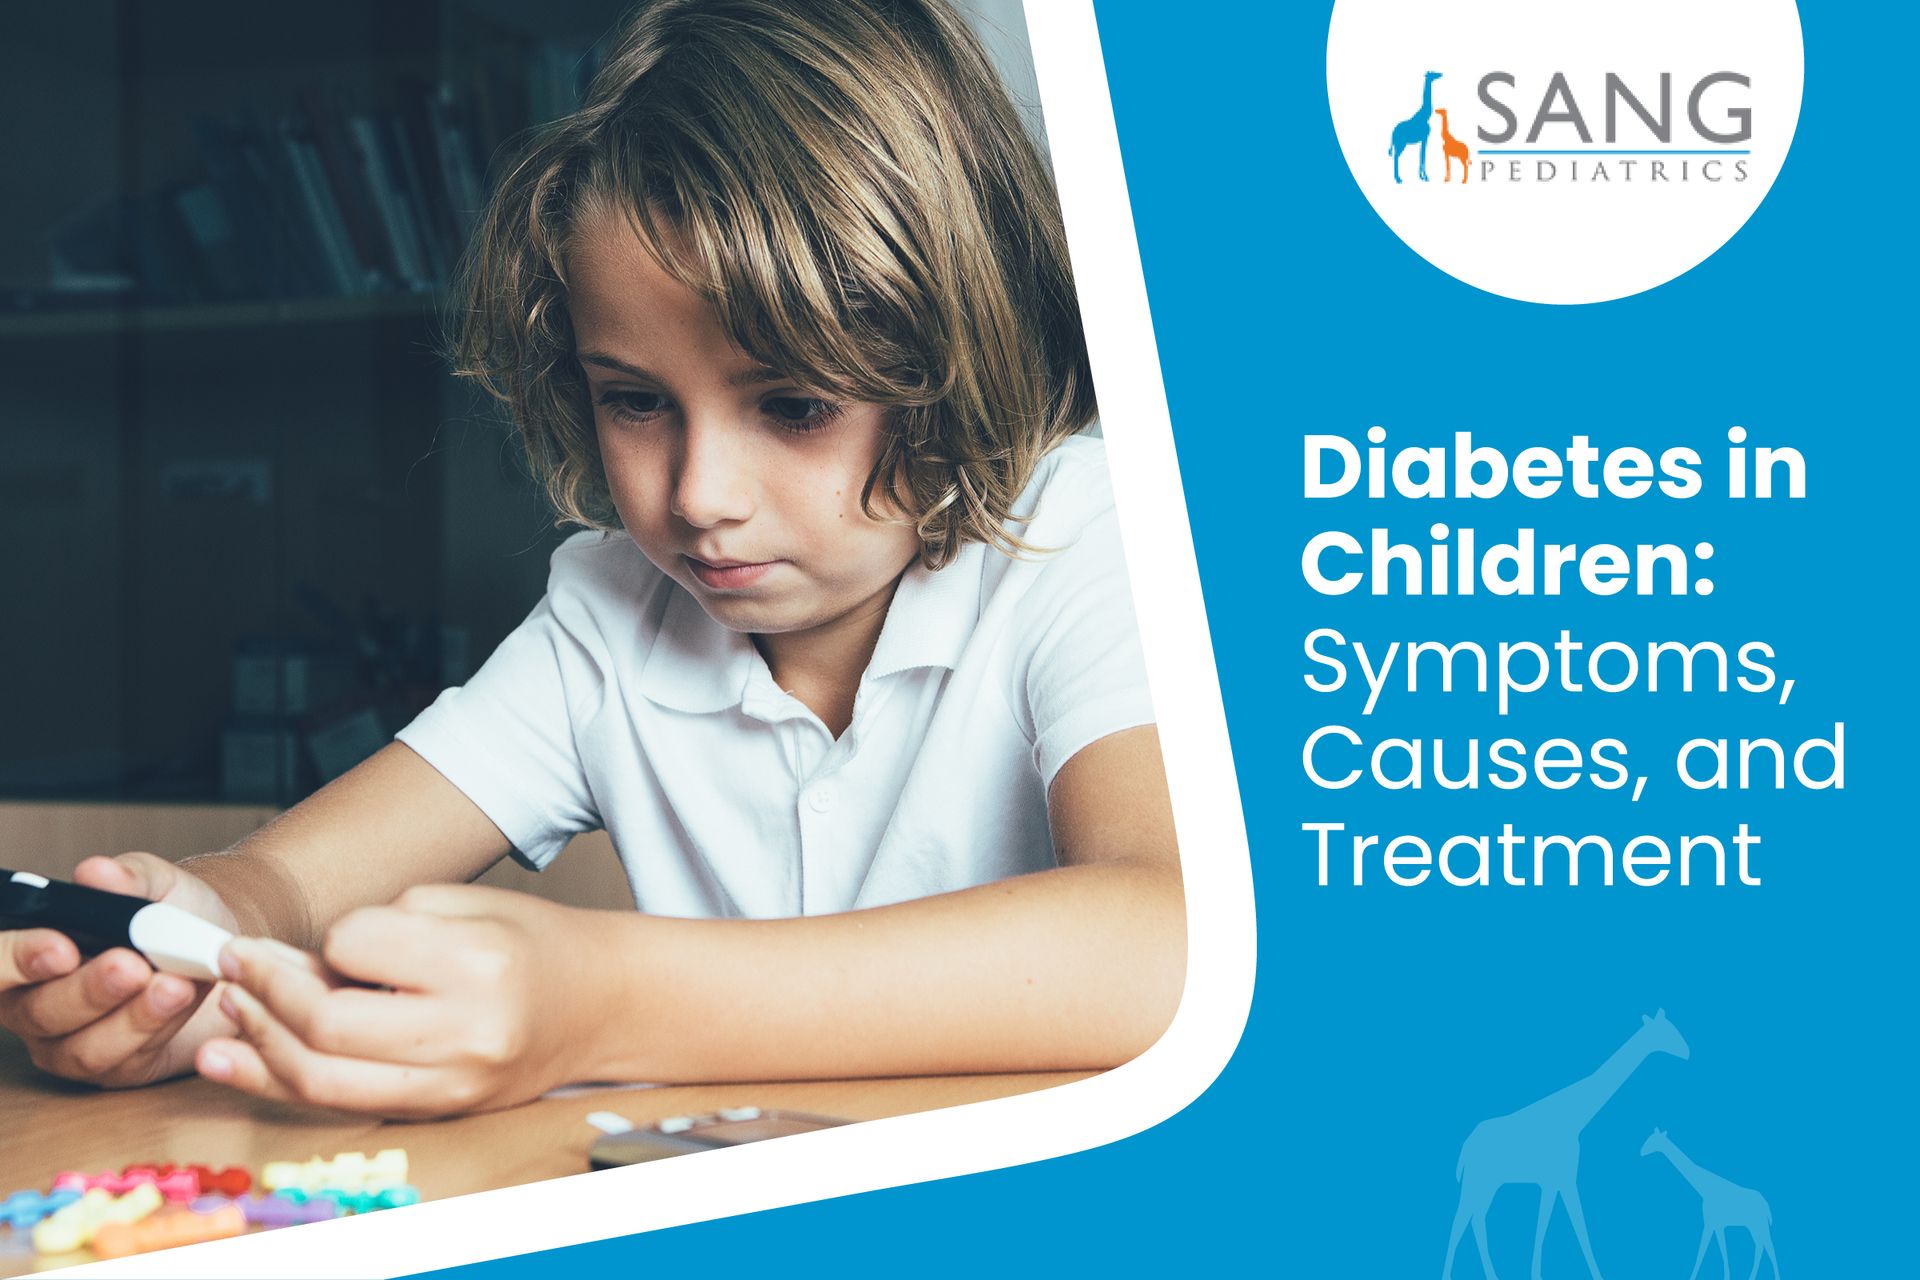 Diabetes in Children: Symptoms, Causes, and Treatment